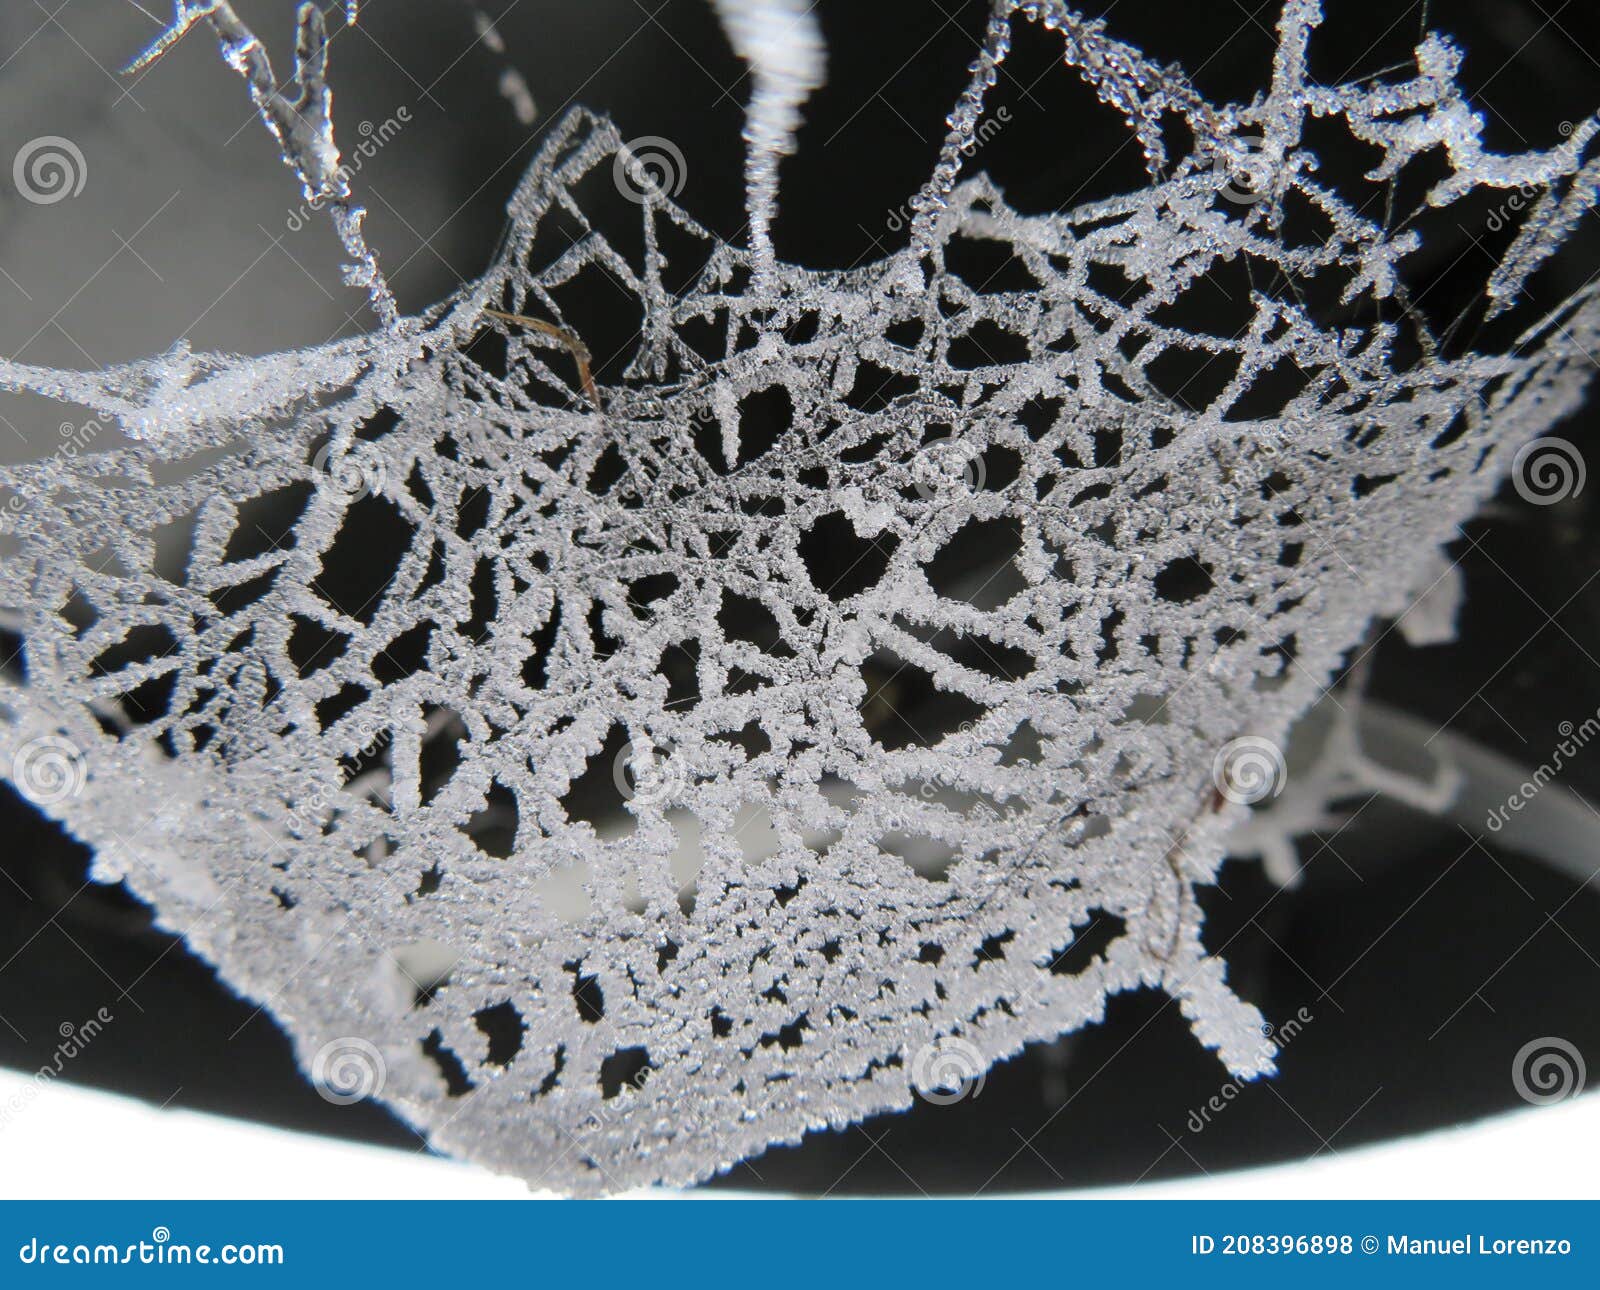 beautiful spider web frozen by an intense cold